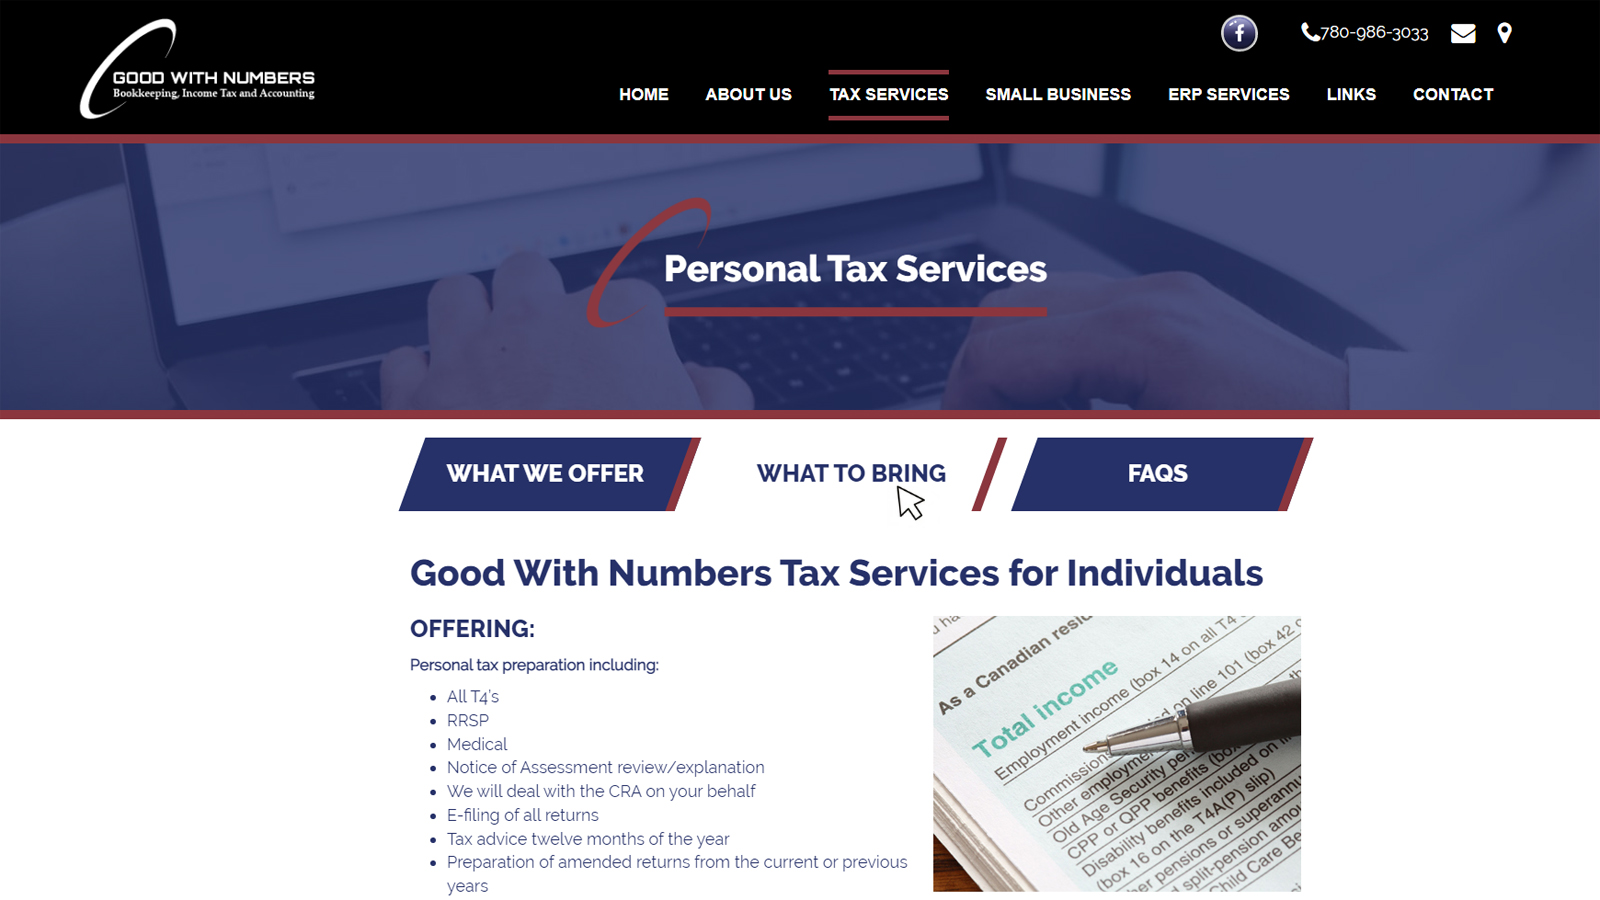 Good With Numbers services page - website designed by Industrial NetMedia/Creative101